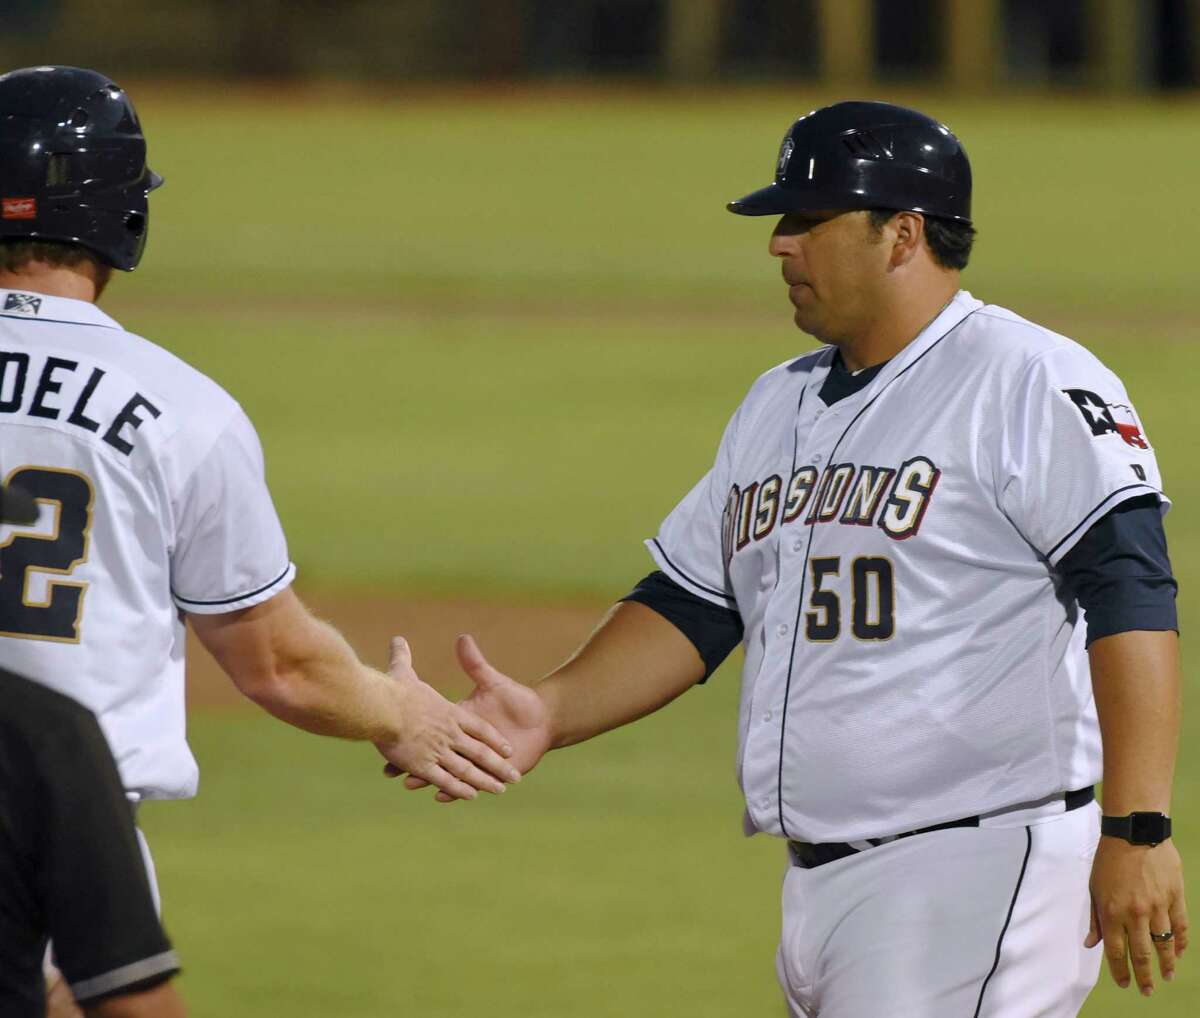 San Antonio Missions manager and third base coach Rod Barajas shakes hands with designated hitter Kyle Gaedele after Gaedele reached third base during Texas League action against Frisco at Wolff Stadium on Saturday, Aug. 1, 2015.